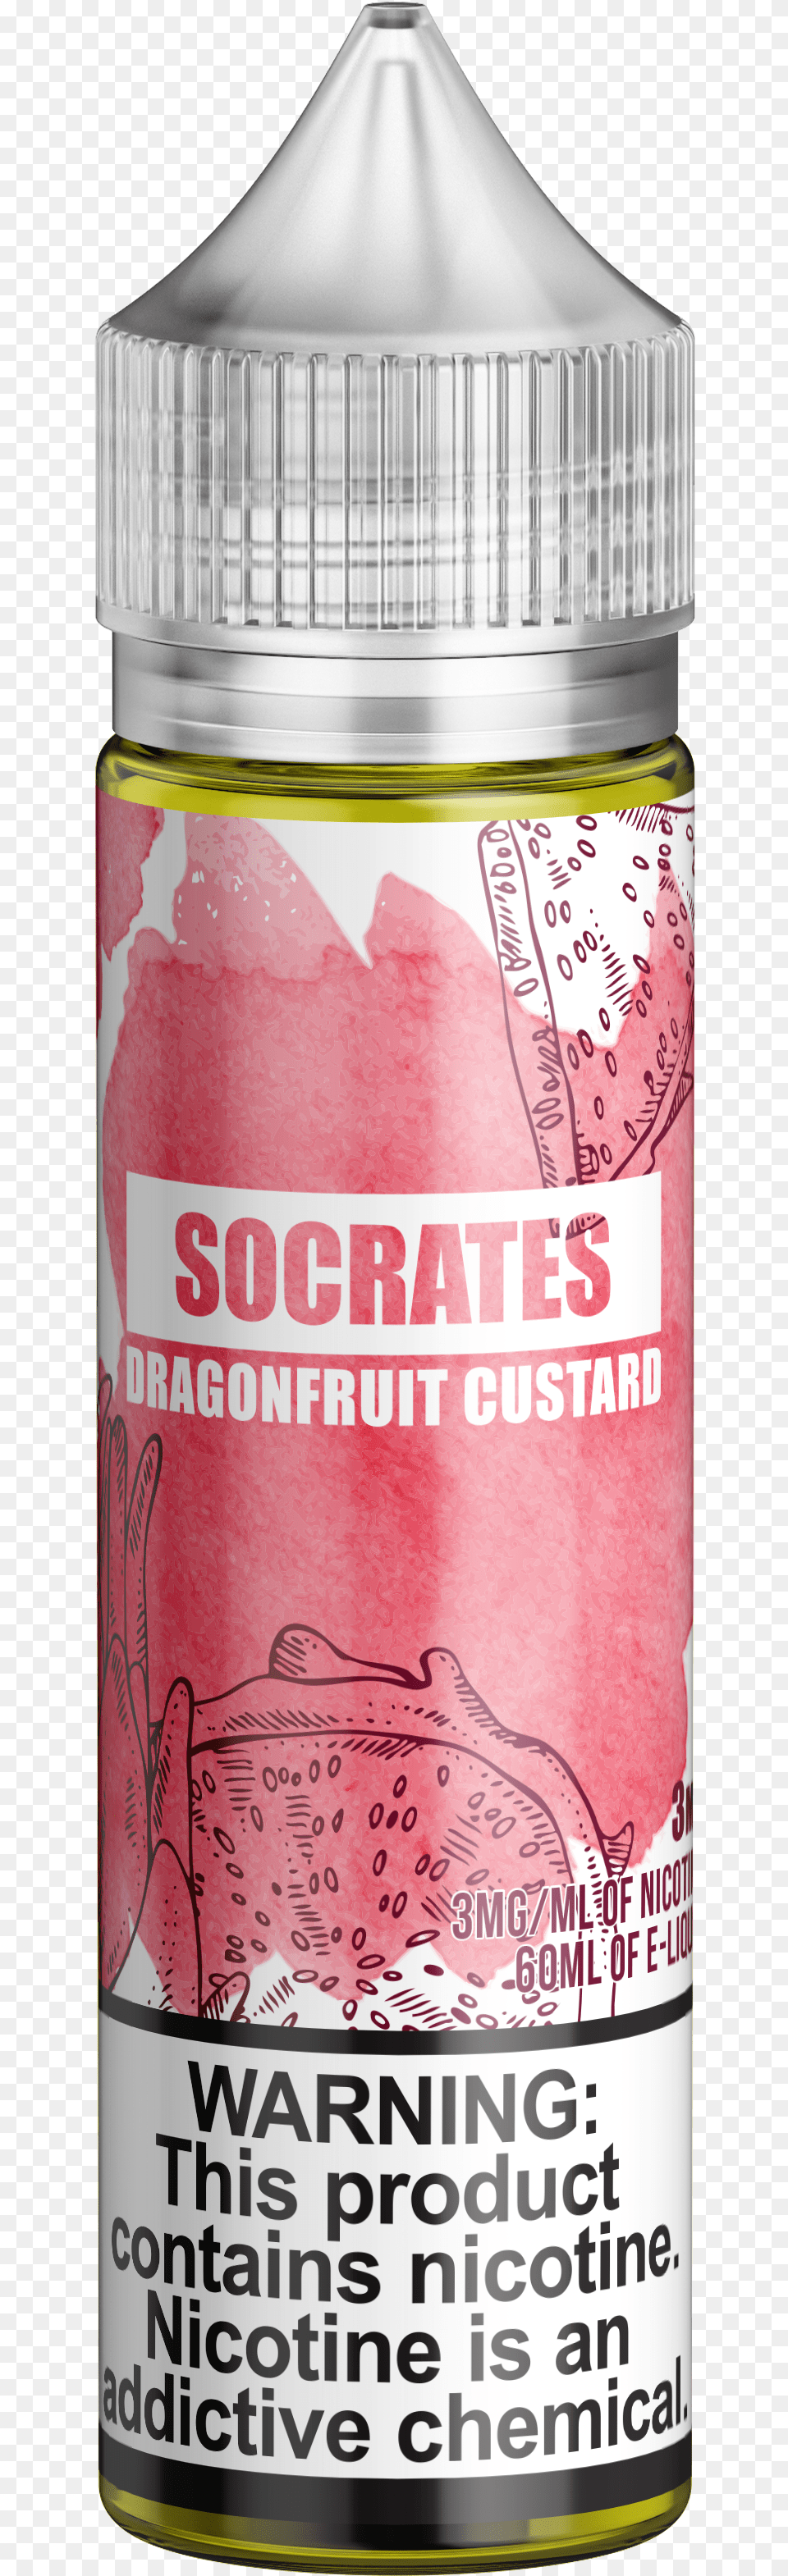 Socrates Electronic Cigarette Aerosol And Liquid, Paint Container, Jar, Bottle, Cosmetics Png